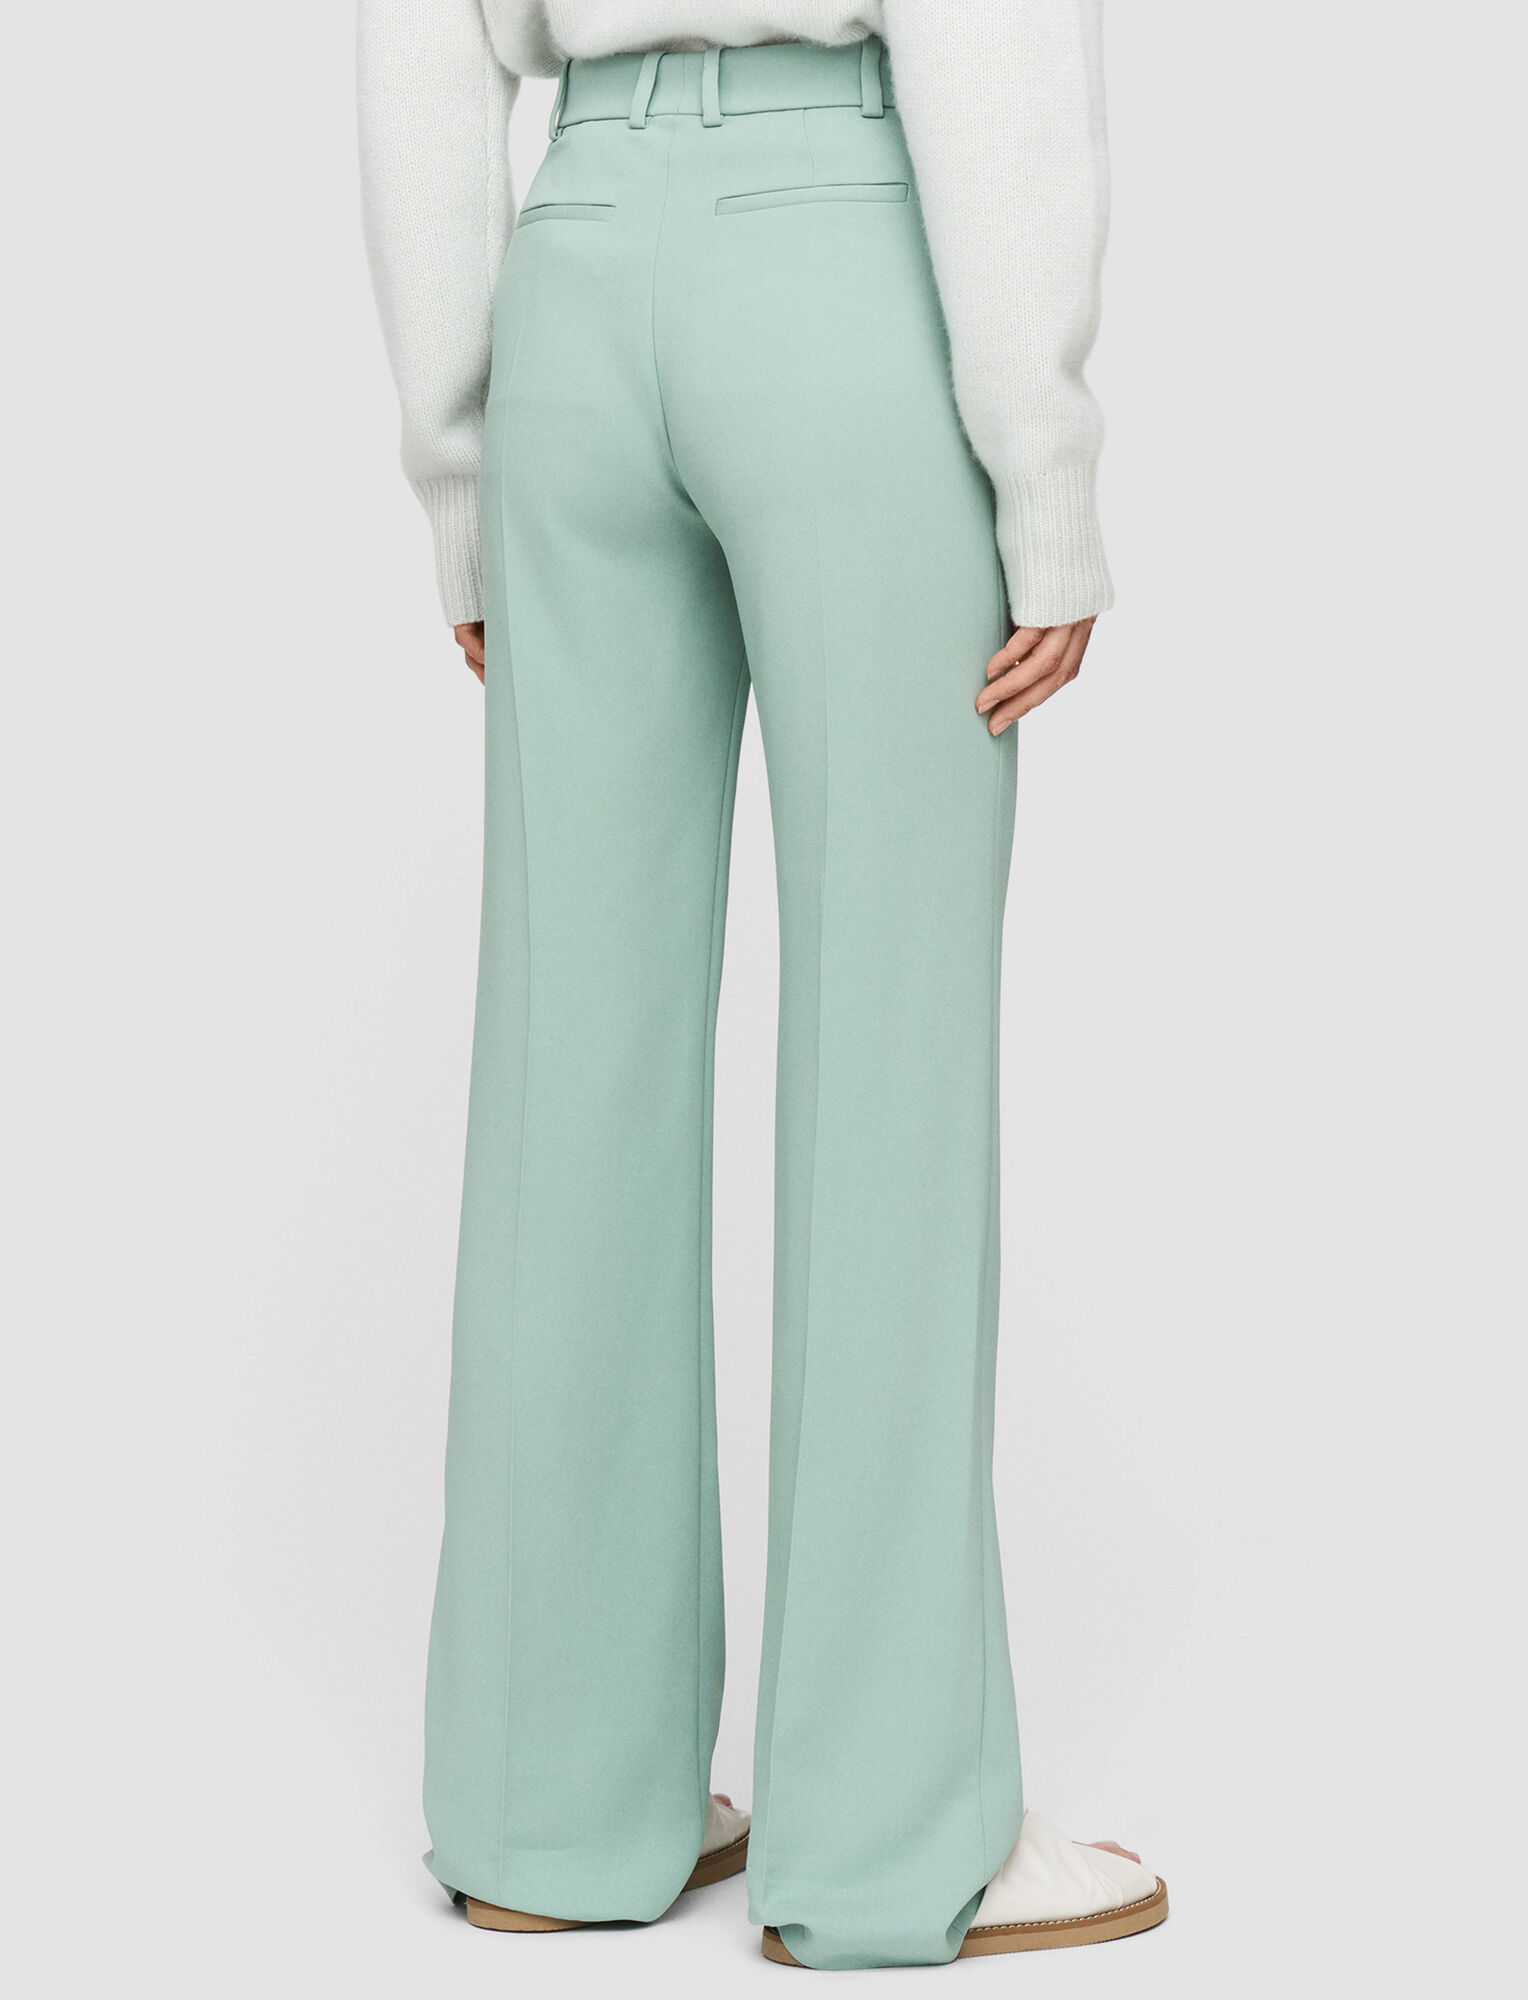 Joseph, Comfort Cady Morissey Trousers, in Sage